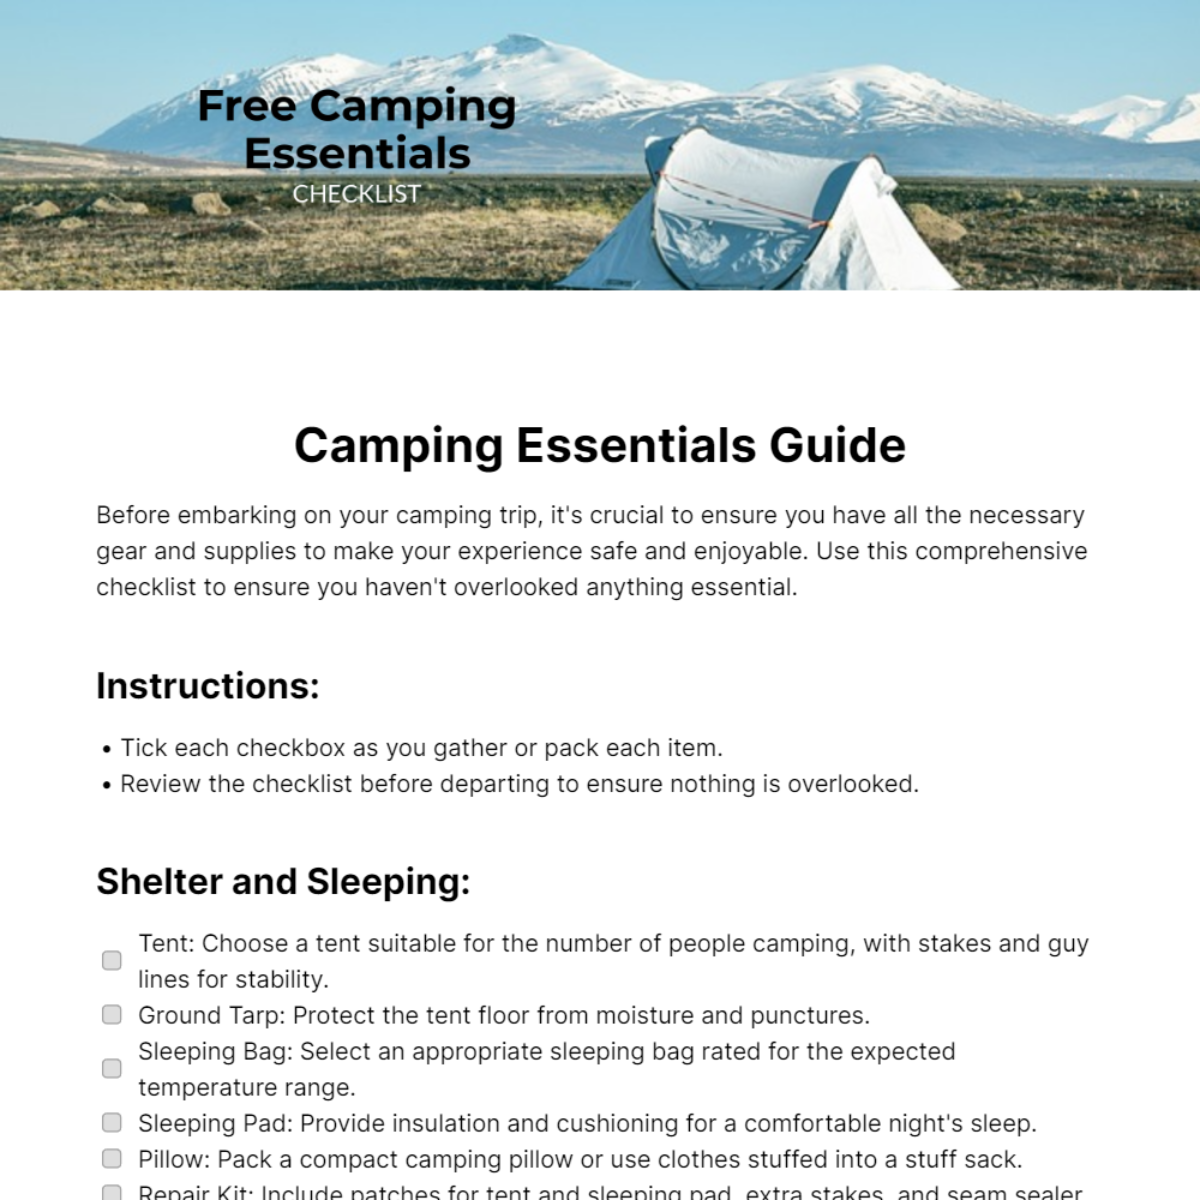 Camping Essentials Checklist Template - Edit Online & Download Example